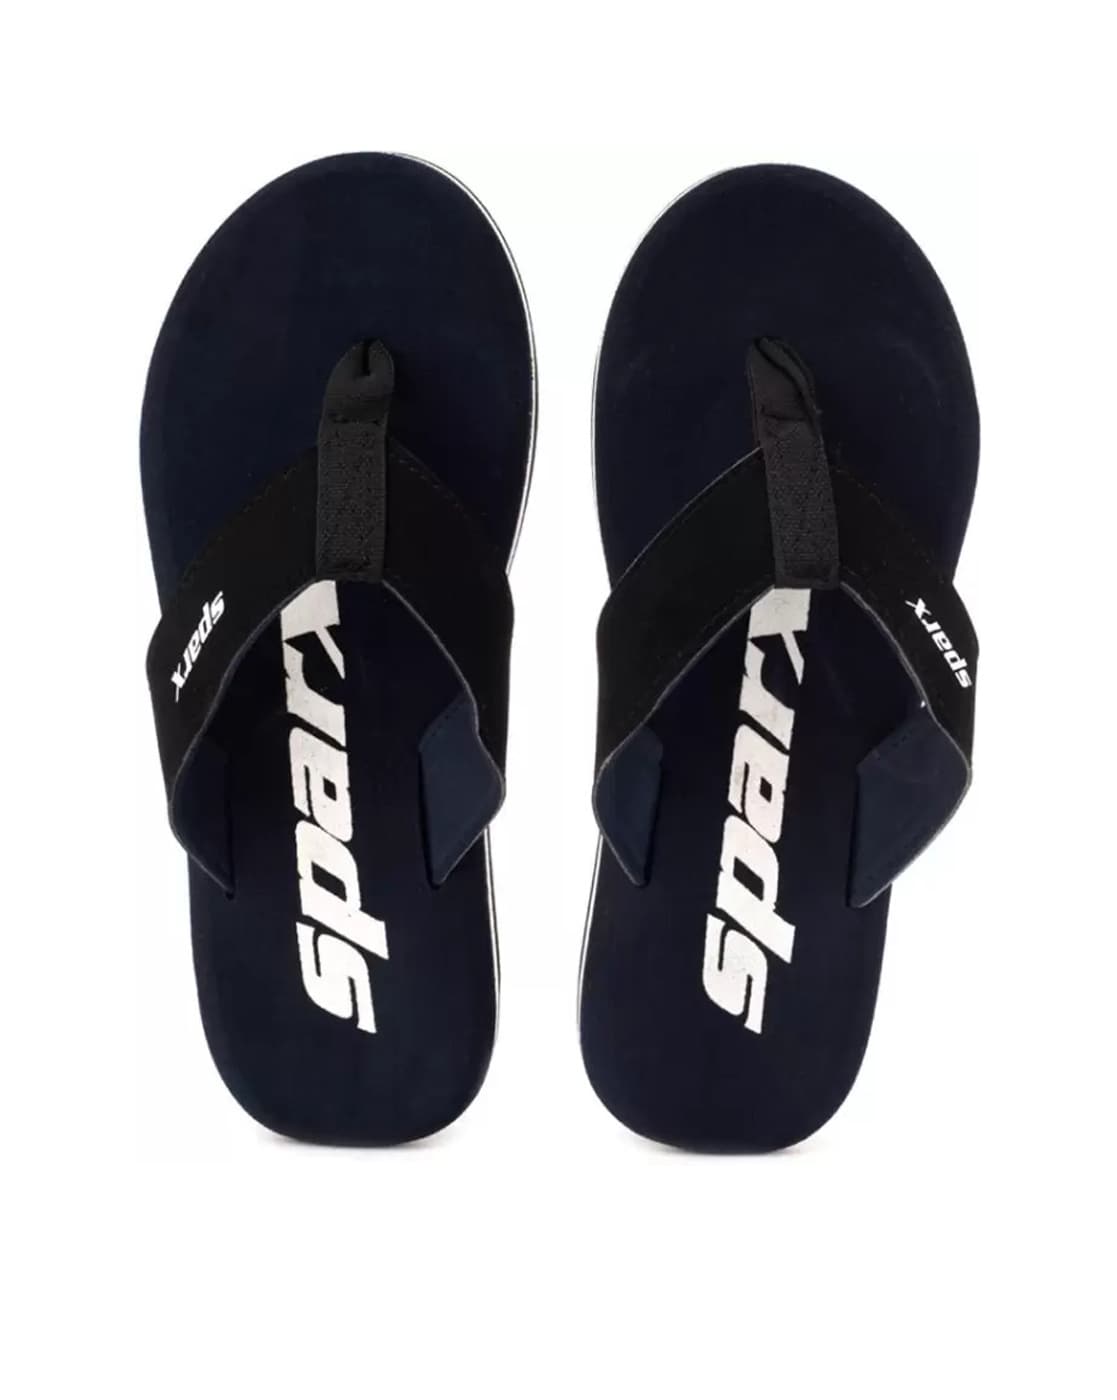 Buy Sparx Men's Flip-Flops and House Slippers at Amazon.in-saigonsouth.com.vn